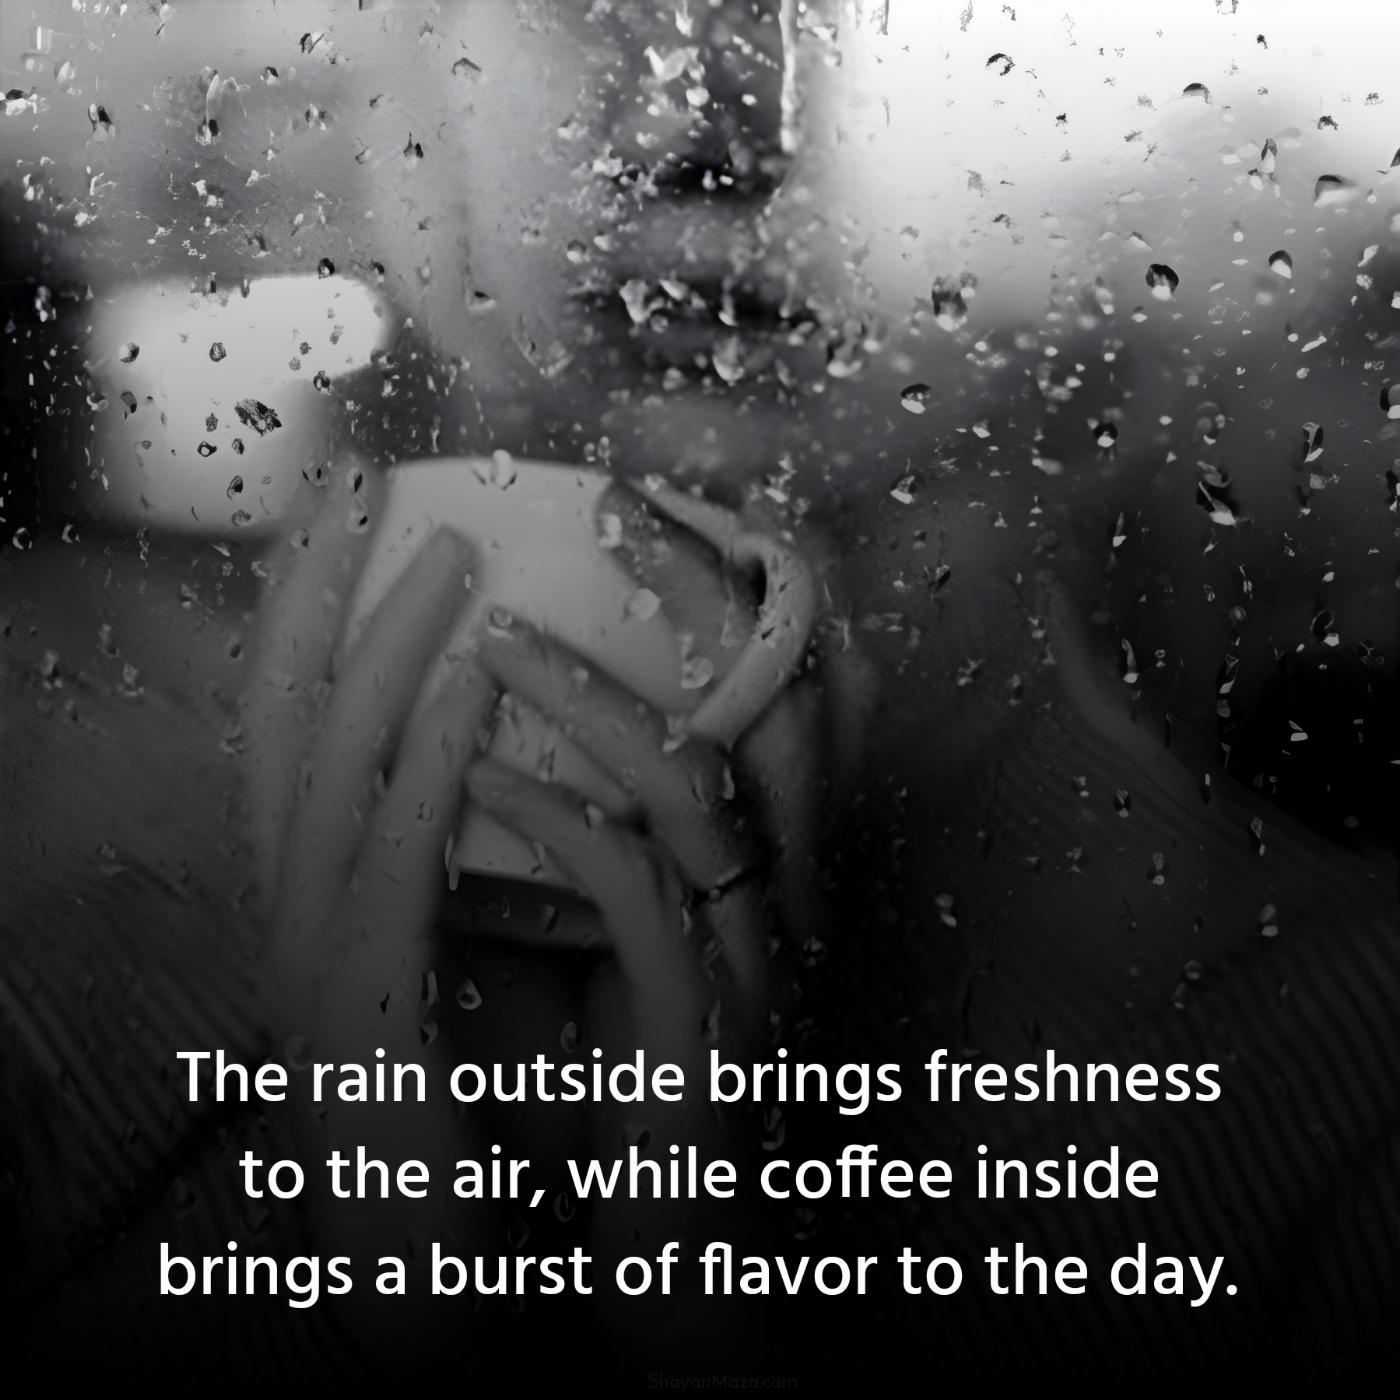 The rain outside brings freshness to the air while coffee inside brings a burst of flavor